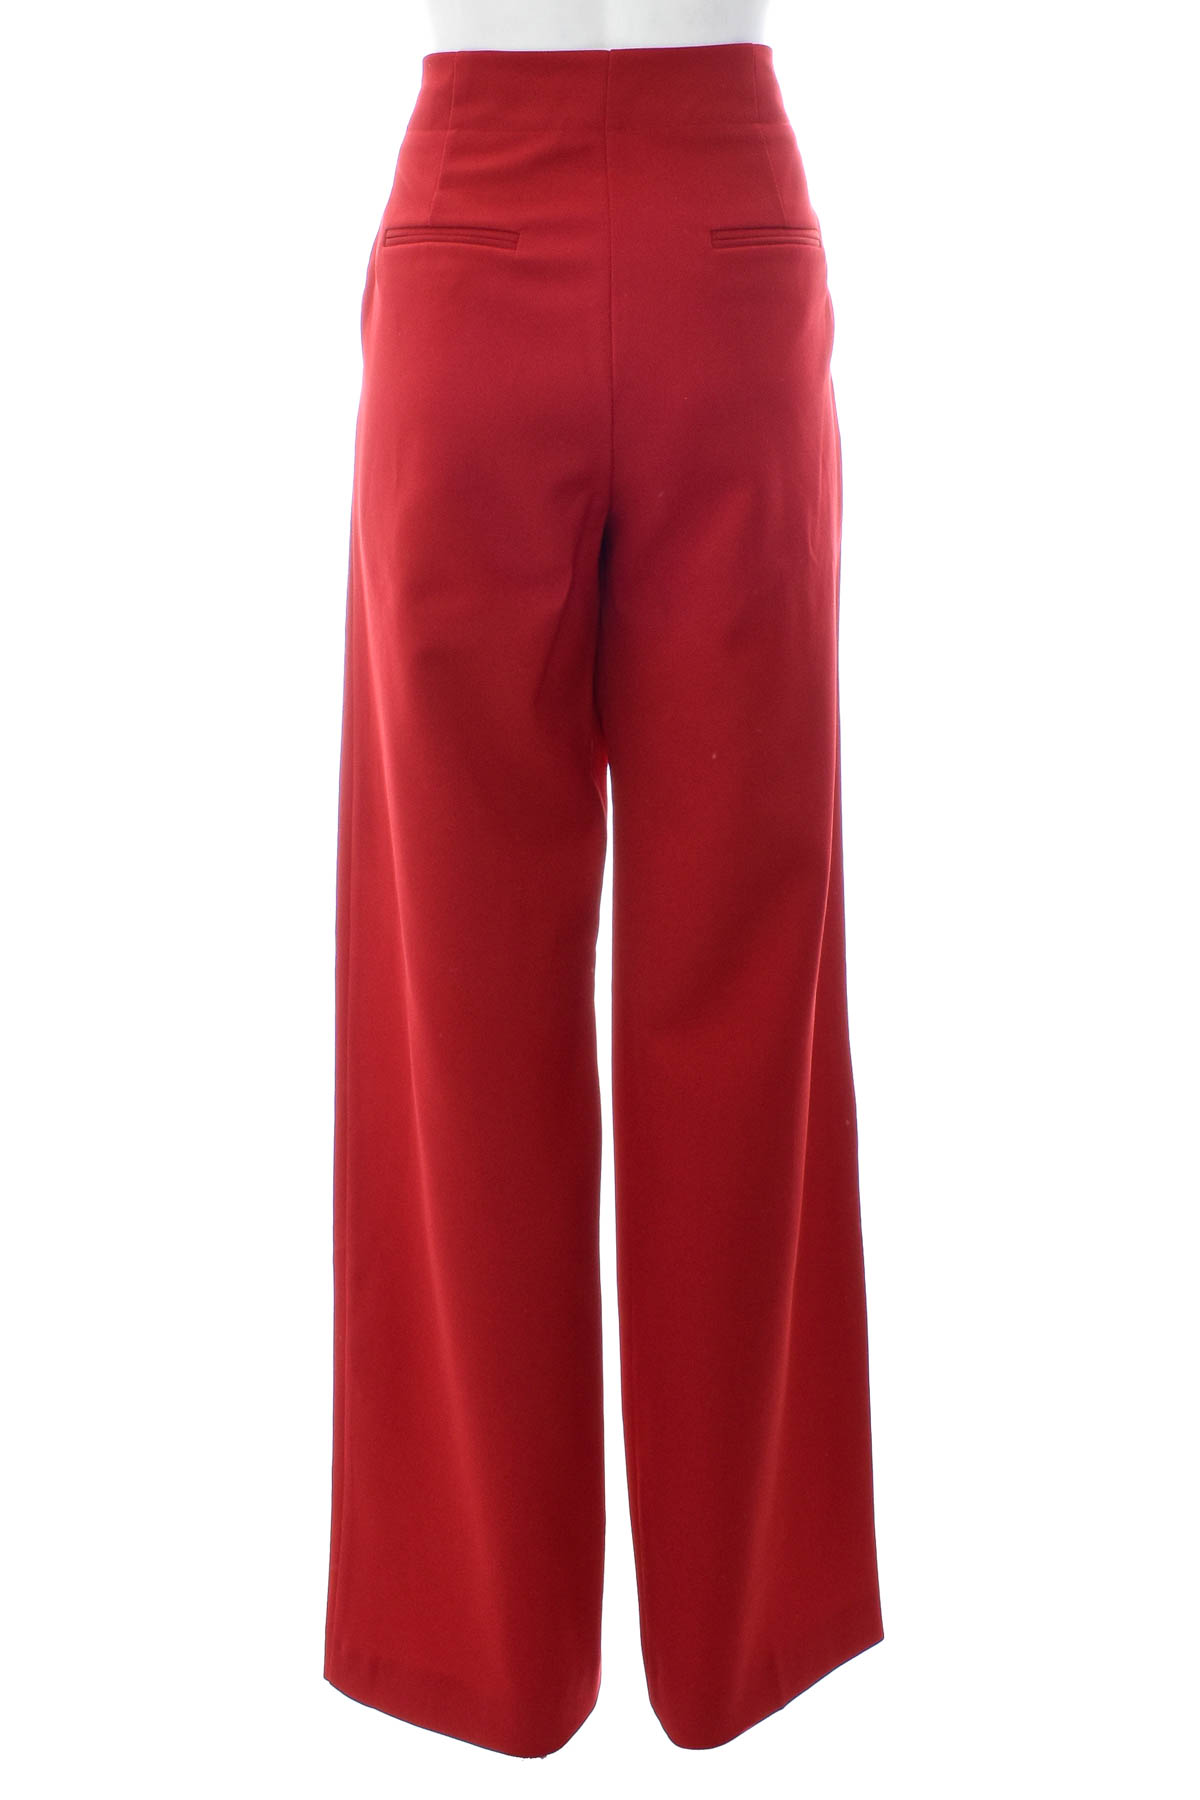 Women's trousers - MNG SUIT - 1